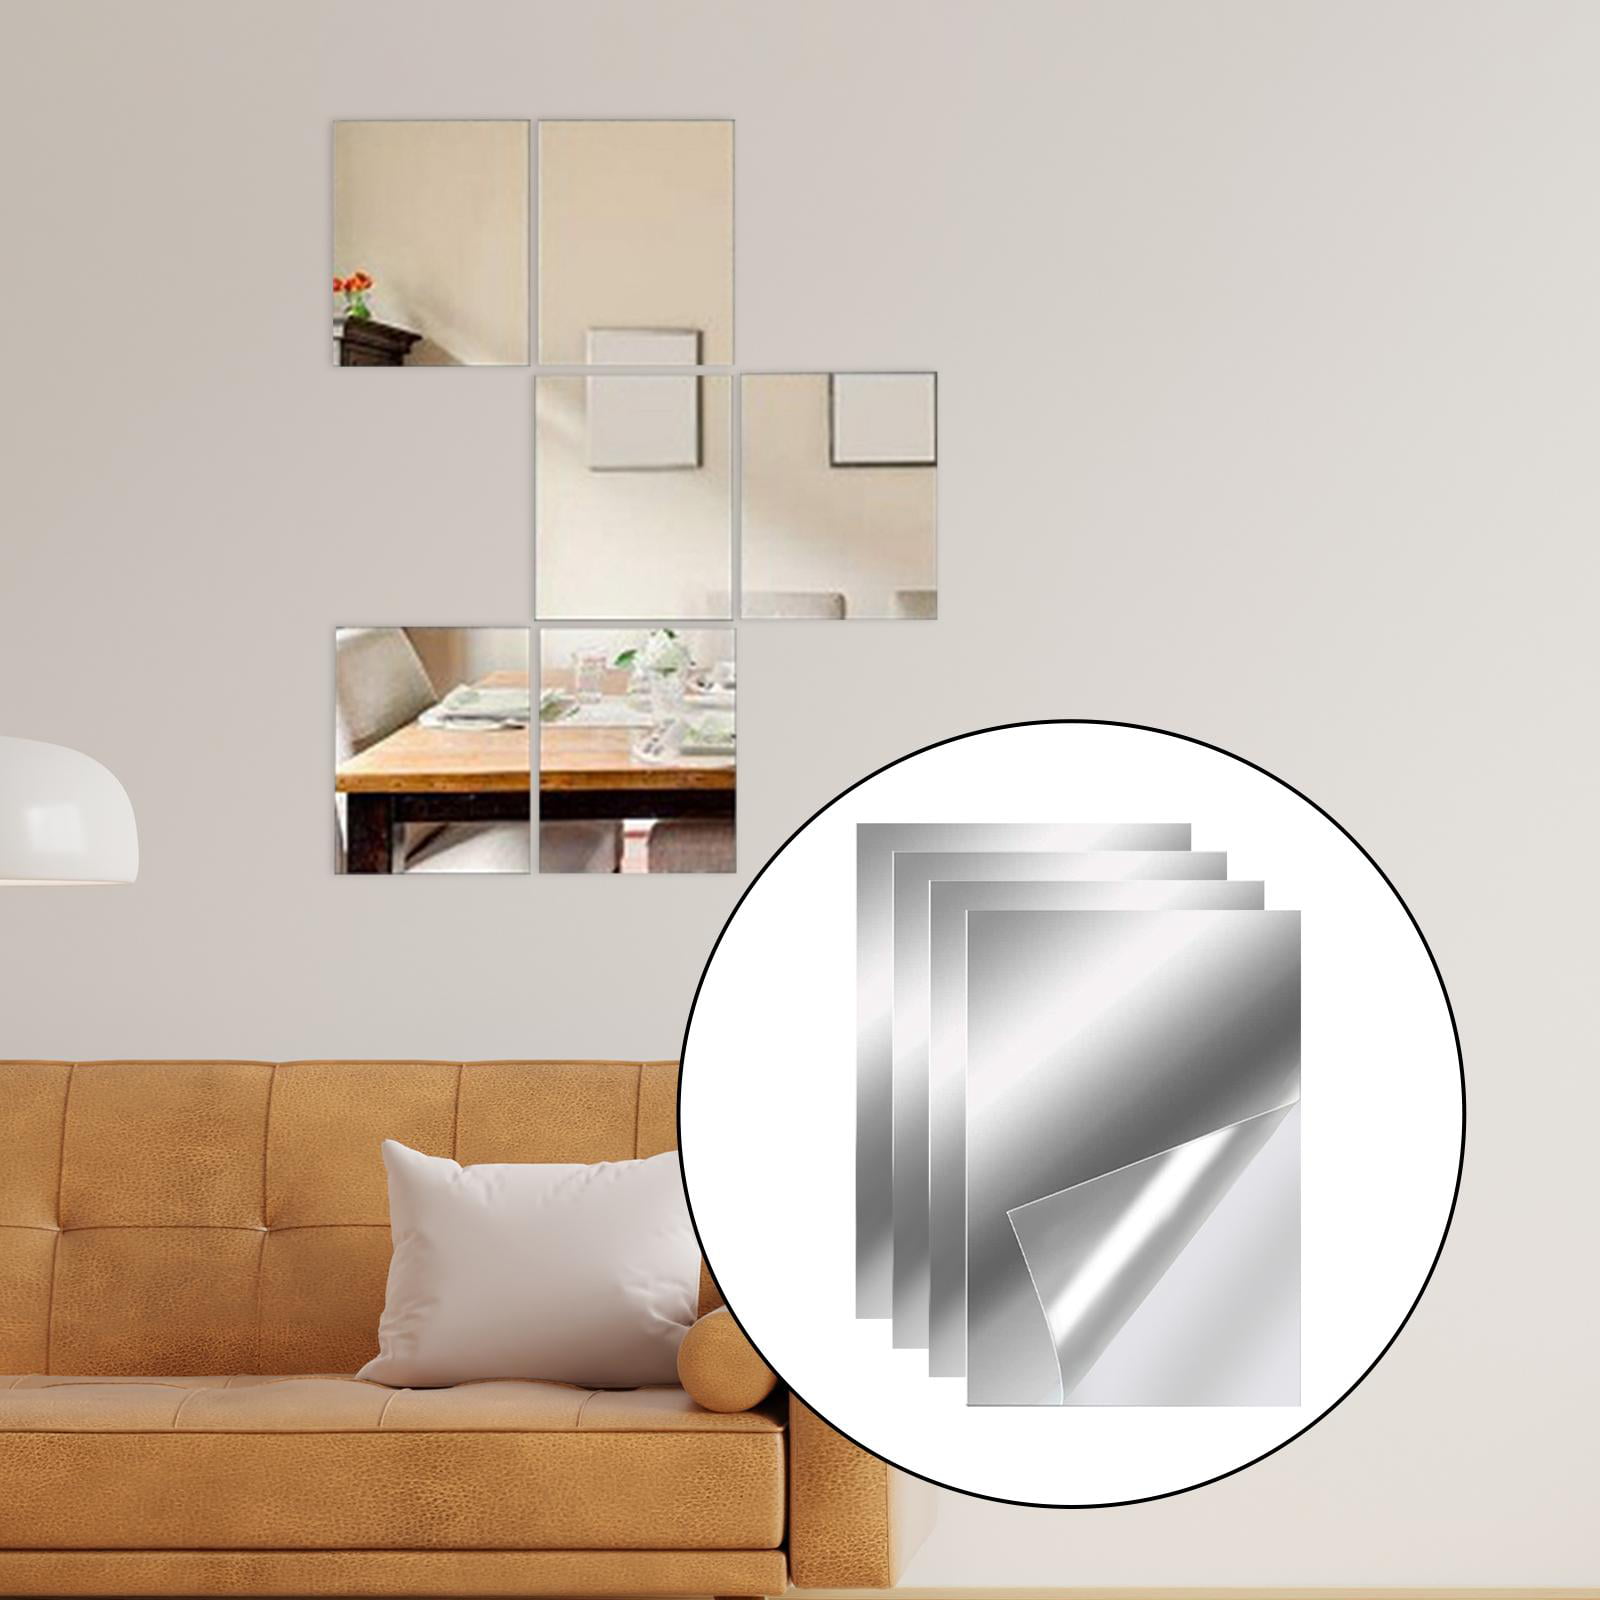  Motarto 16 Sheets Flexible Mirror Sheets Self Adhesive Mirror  Wall Stickers Removable Acrylic Mirror for Home Living Room Bedroom Decor,  4 x 4 inches : Home & Kitchen